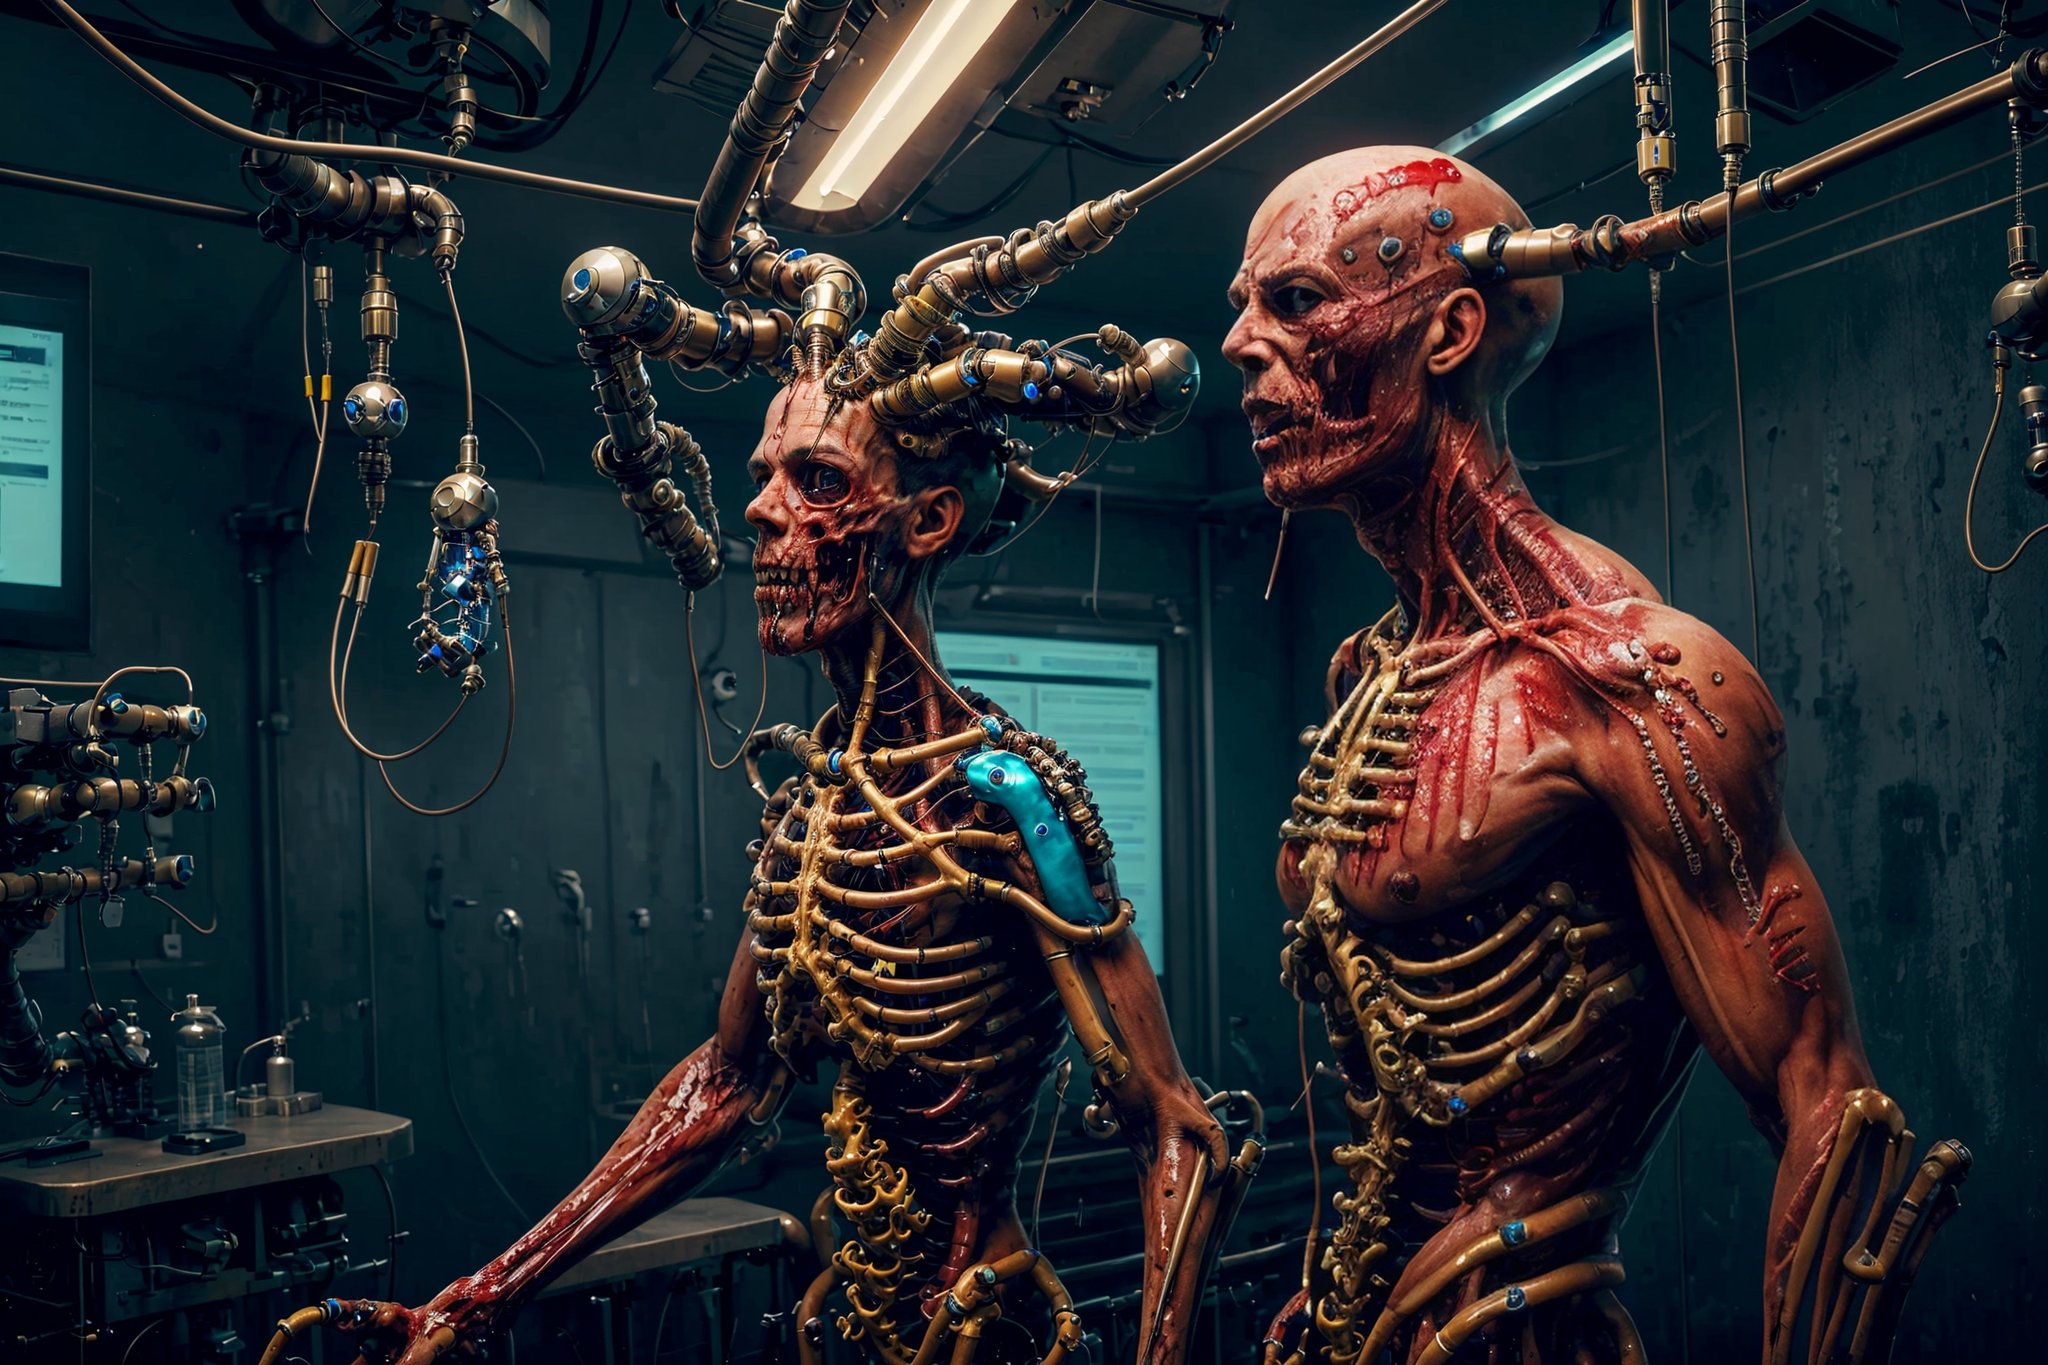 surgery room, doctors, bloody patient, hellish environment, high details, ornate, biopunk style, realistic, photographic quality